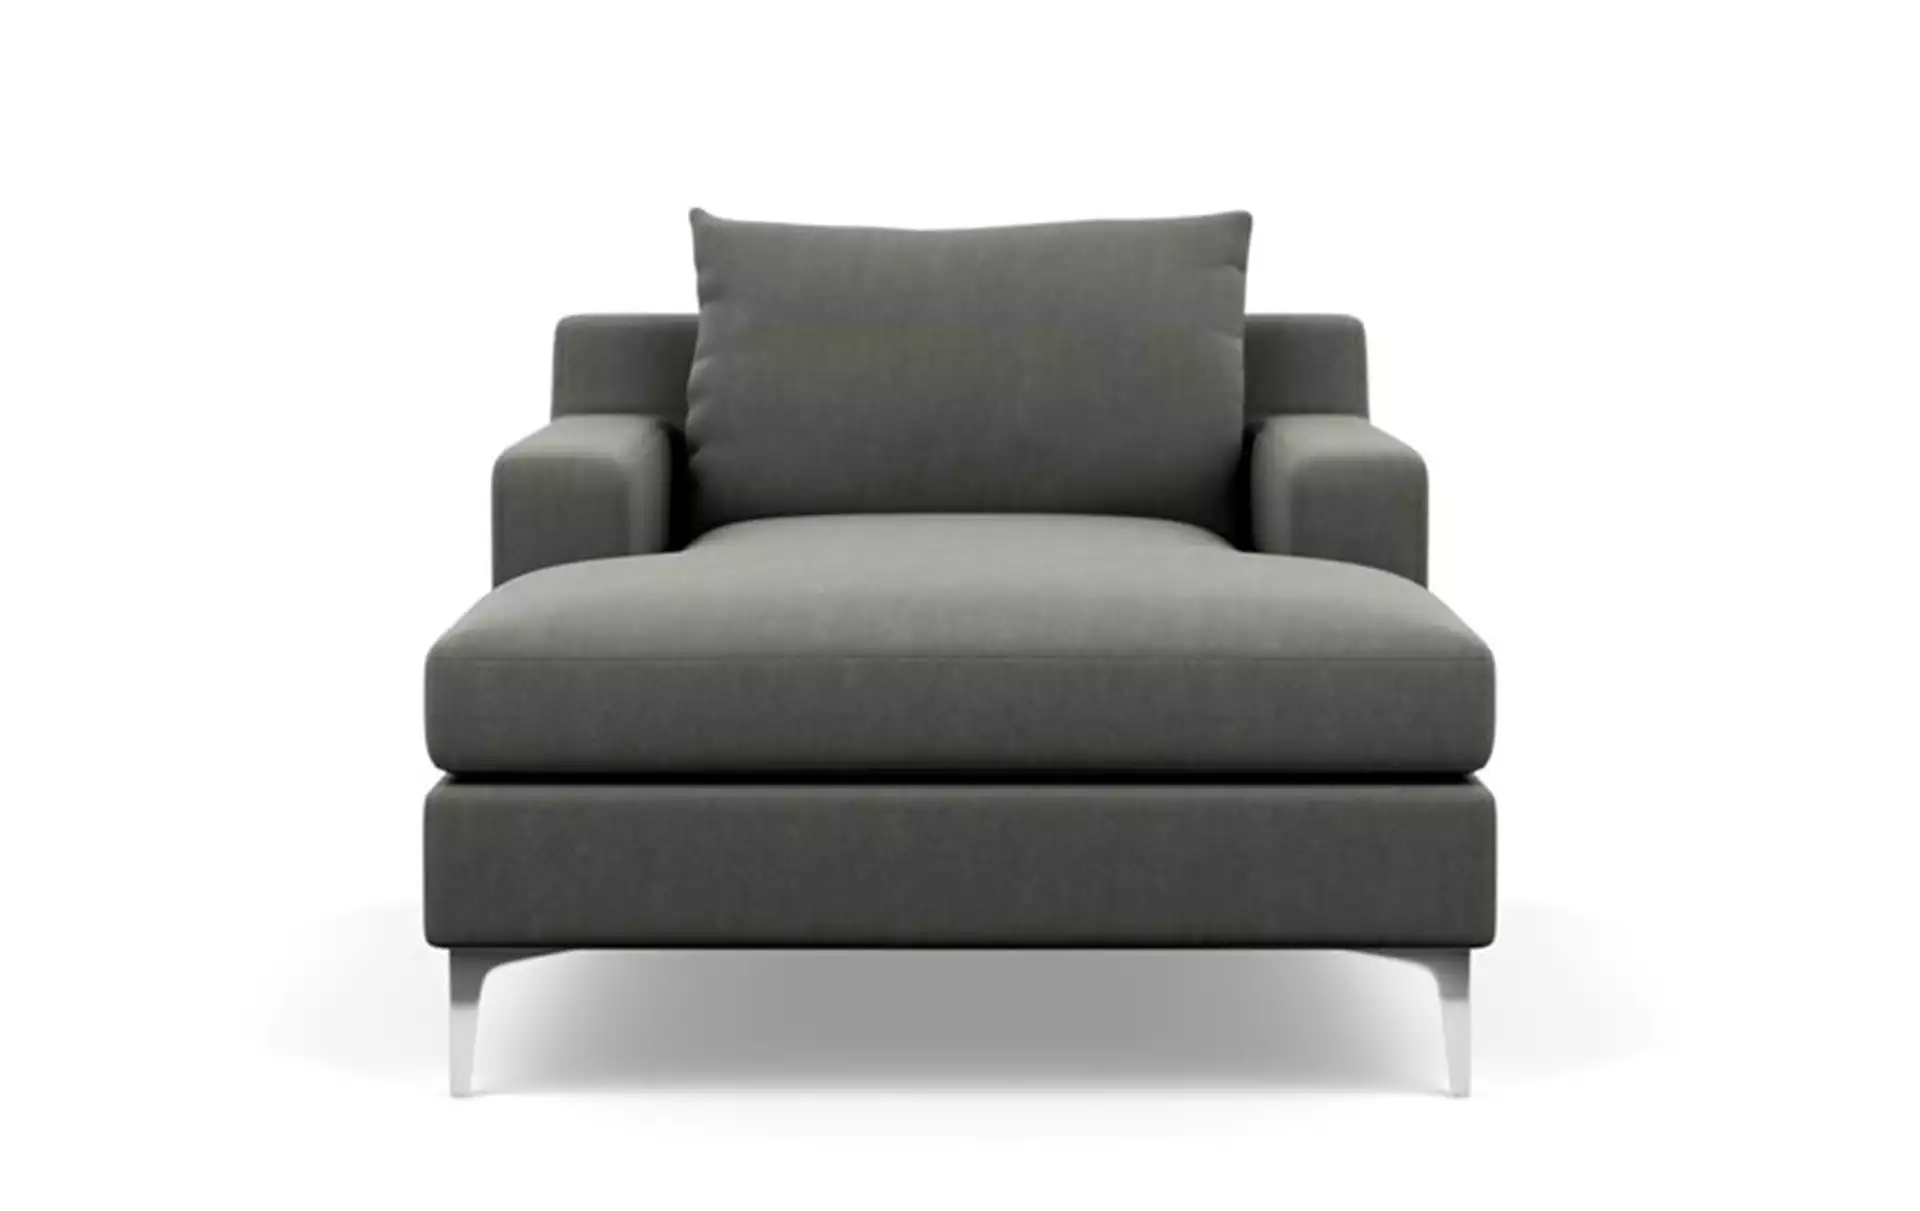 Sloan Chaise Chaise Lounge with Grey Tent Fabric, down alt. cushions, and Chrome Plated legs